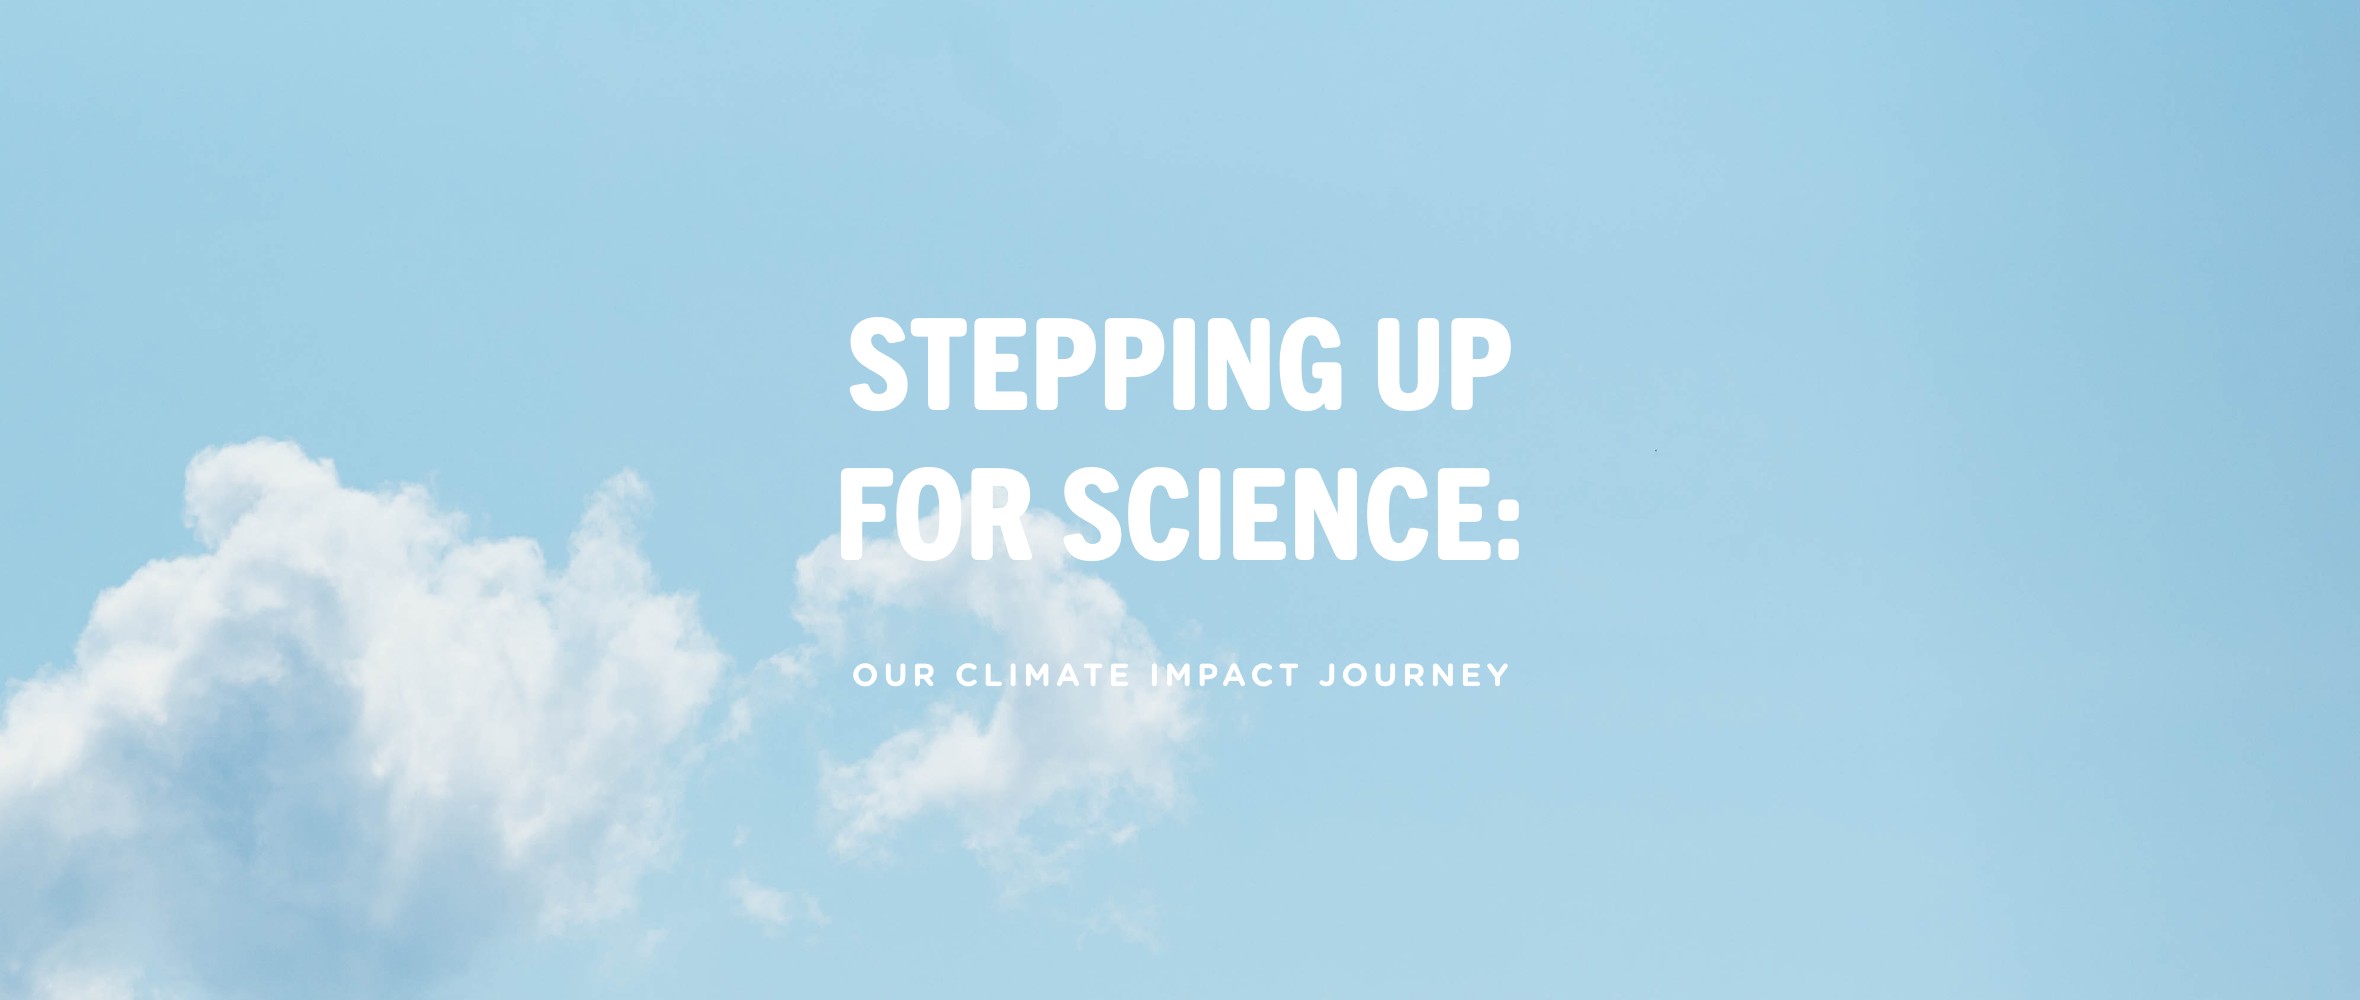 Stepping up for science. Our Climate Impact Journey 